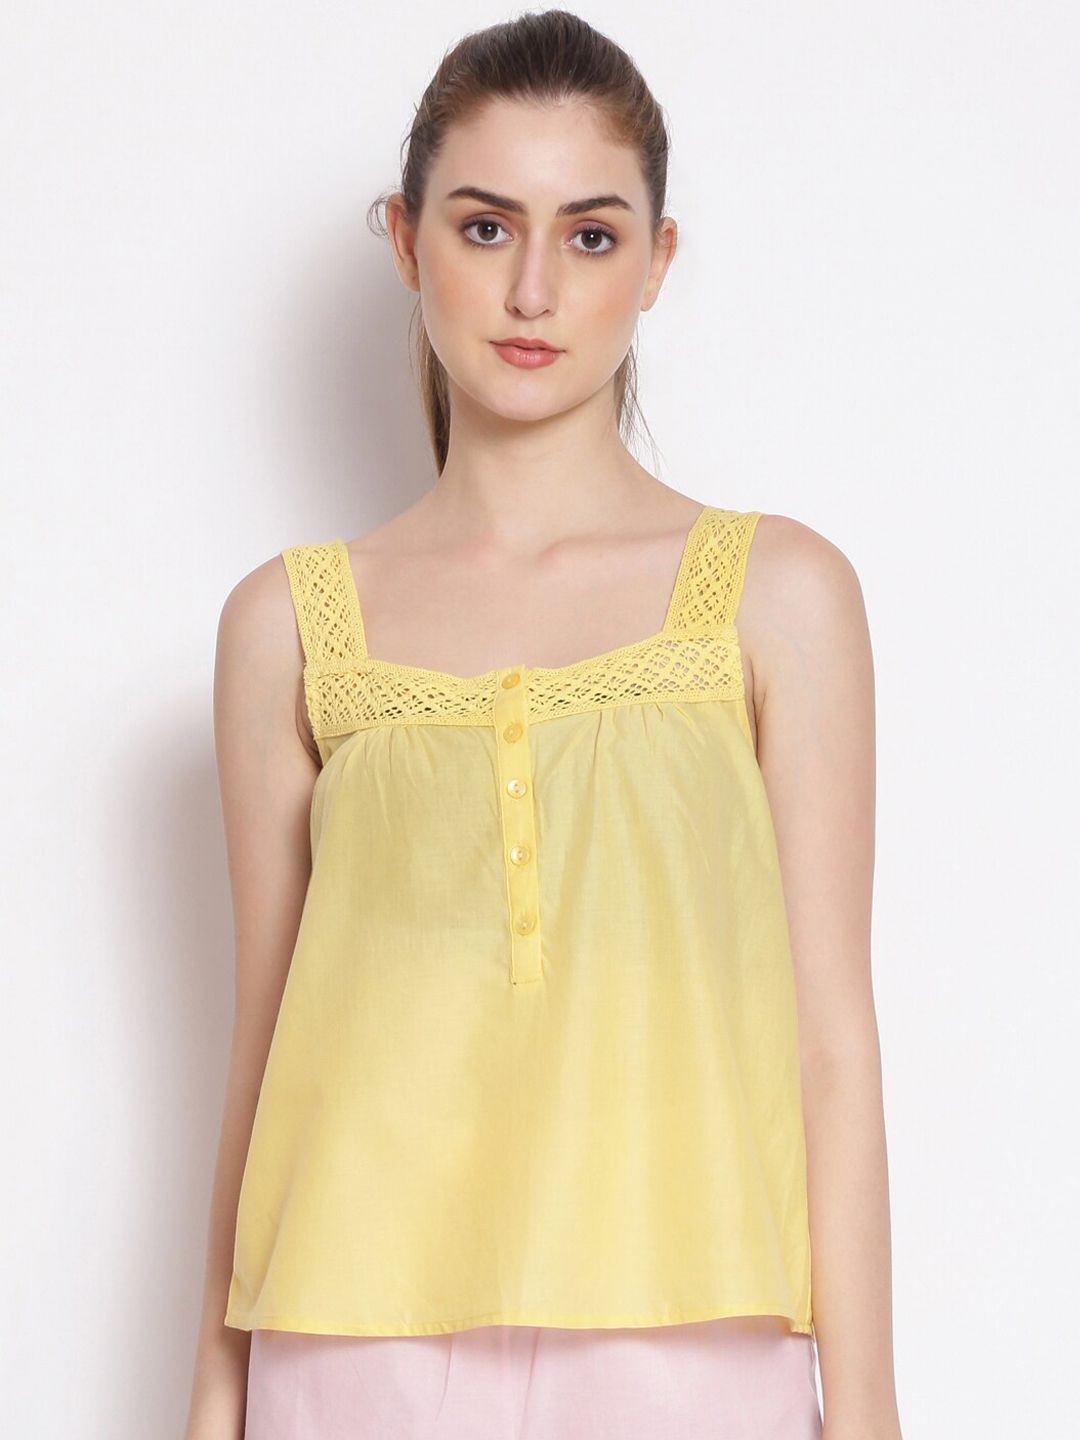 Oxolloxo Yellow Cotton Lounge Top Price in India